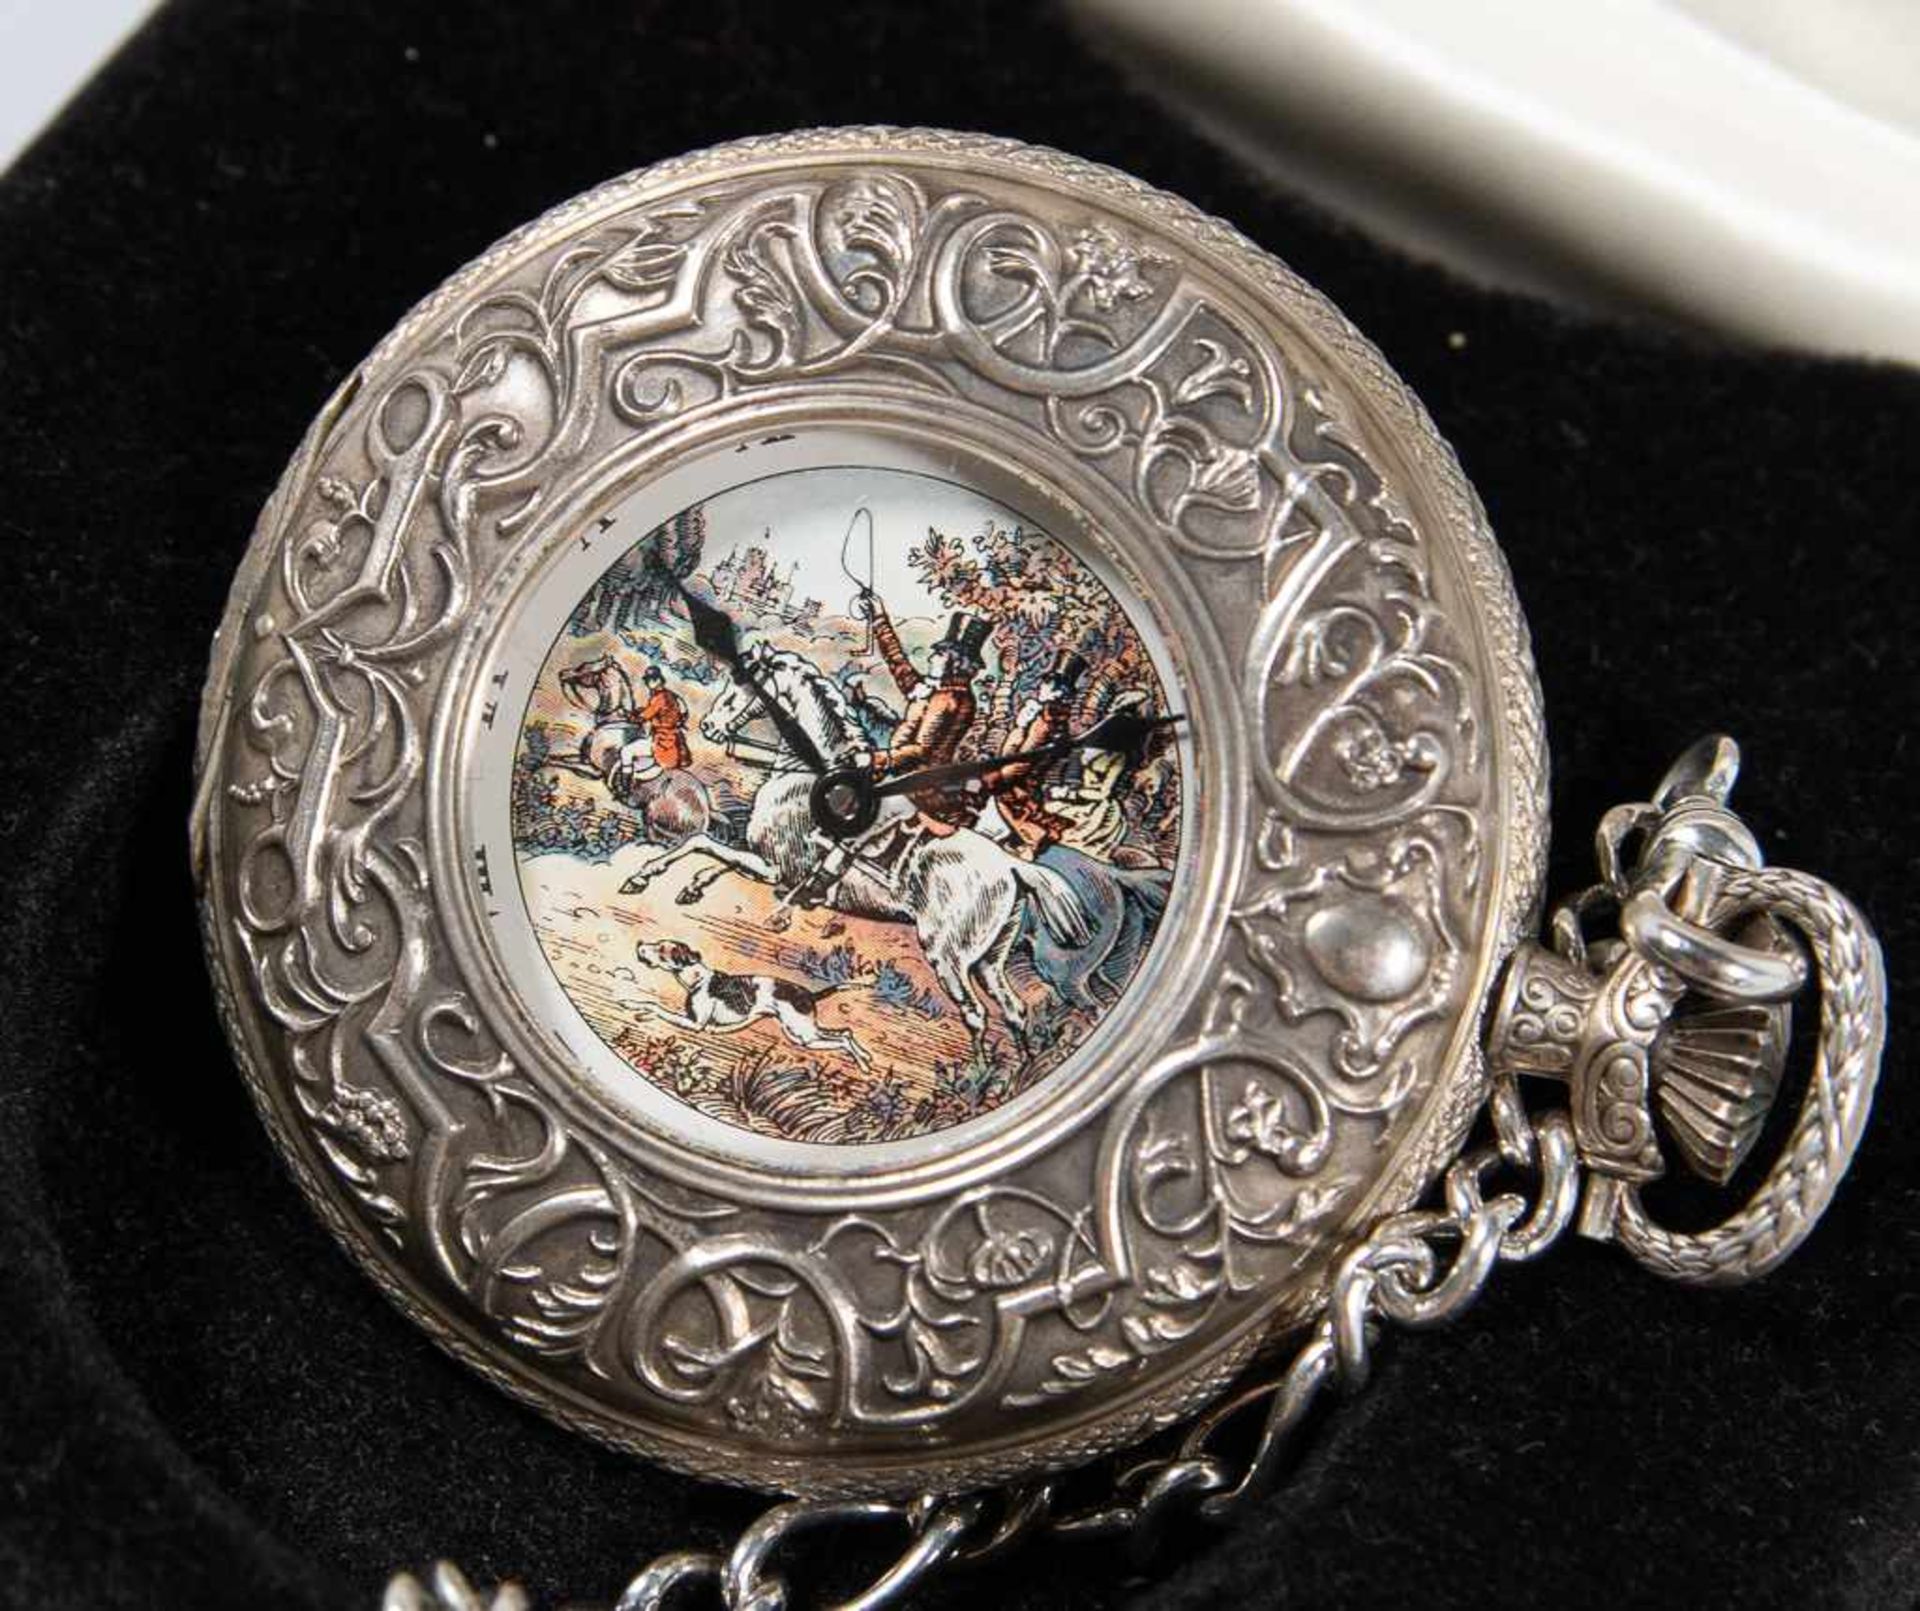 Alfex Pocket Watch - Image 6 of 6